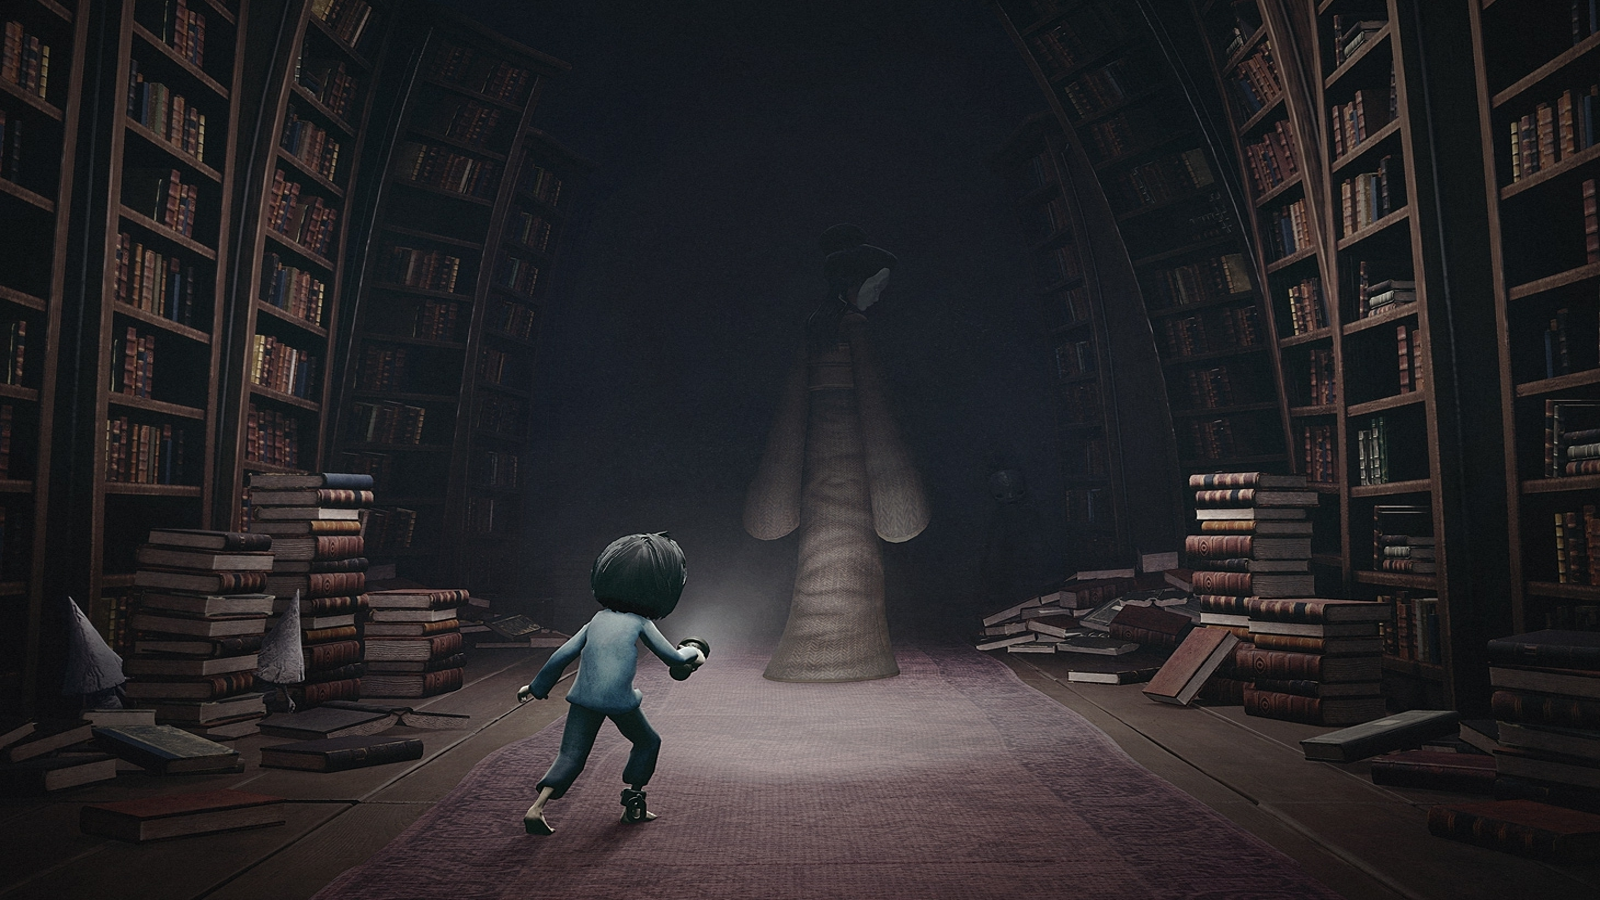 Little Nightmares fan spots references to sequel in first game's DLC